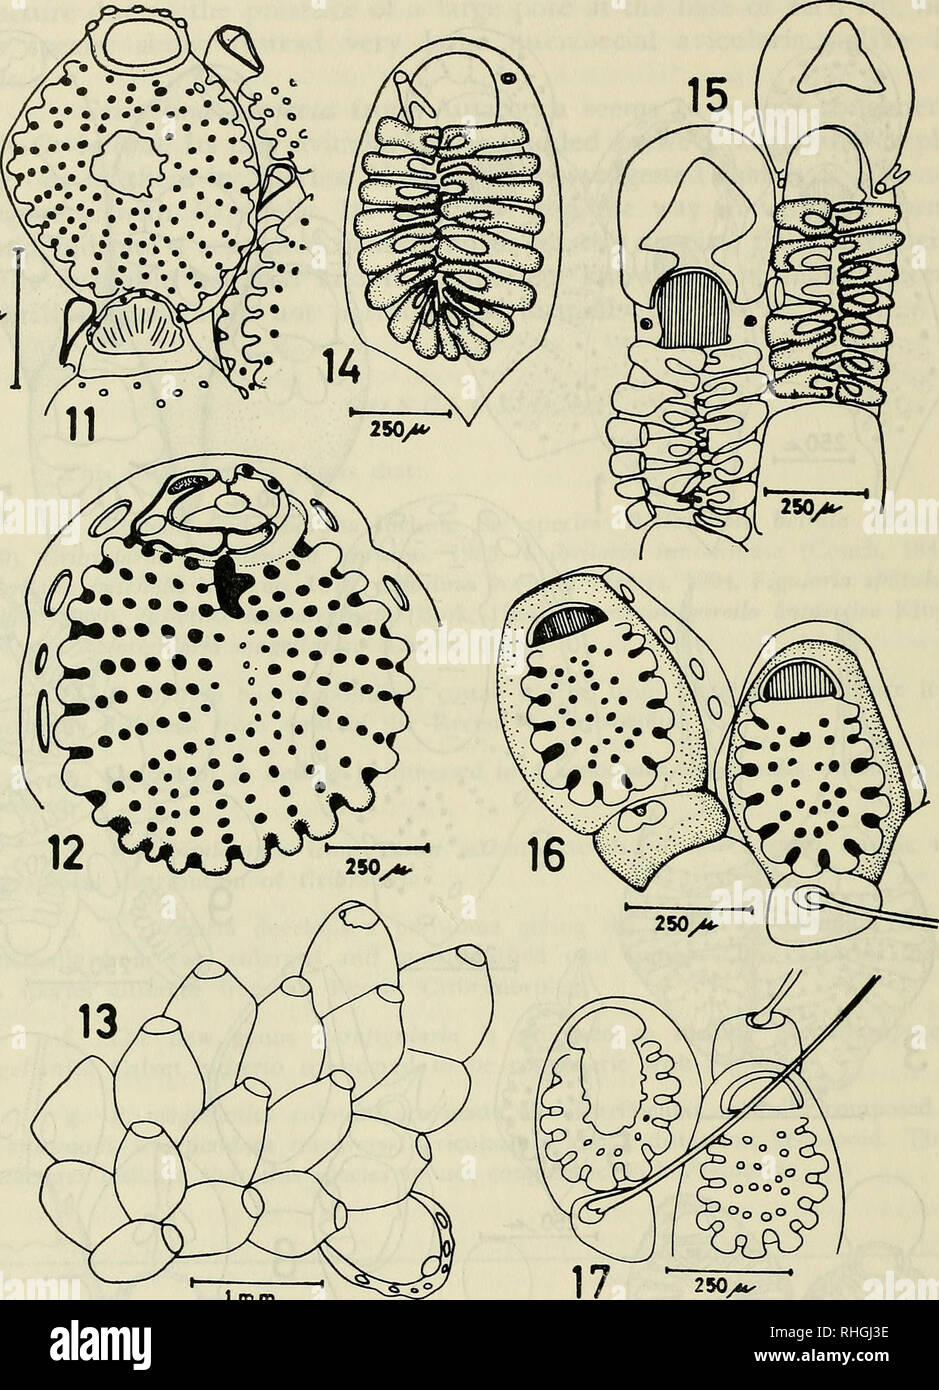 . Boletin de la Sociedad de Biología de Concepción. Sociedad de Biología de Concepción; Biology; Biology. 66 Bol. Soc. Biol. Concepción, Chile. Tomo 55, 1984. 50^. 1 mm Fig. 11.- Cribrilina projecta. One zooid having a broken penicystal centre and three interzoecial avicularia. Fig. 12.- C. projecta. Yound zooid at the growing edge showing an early stage in peristome development. Fig. 13.- C. projecta- Young zoarium having what seems to be the ancestrula. Fig. 14.- Membraniporella antárctica. Young zoecium having forked ribs. Fig. 15.- M. antárctica. Ovicelled zooids showing the triangular ect Stock Photo